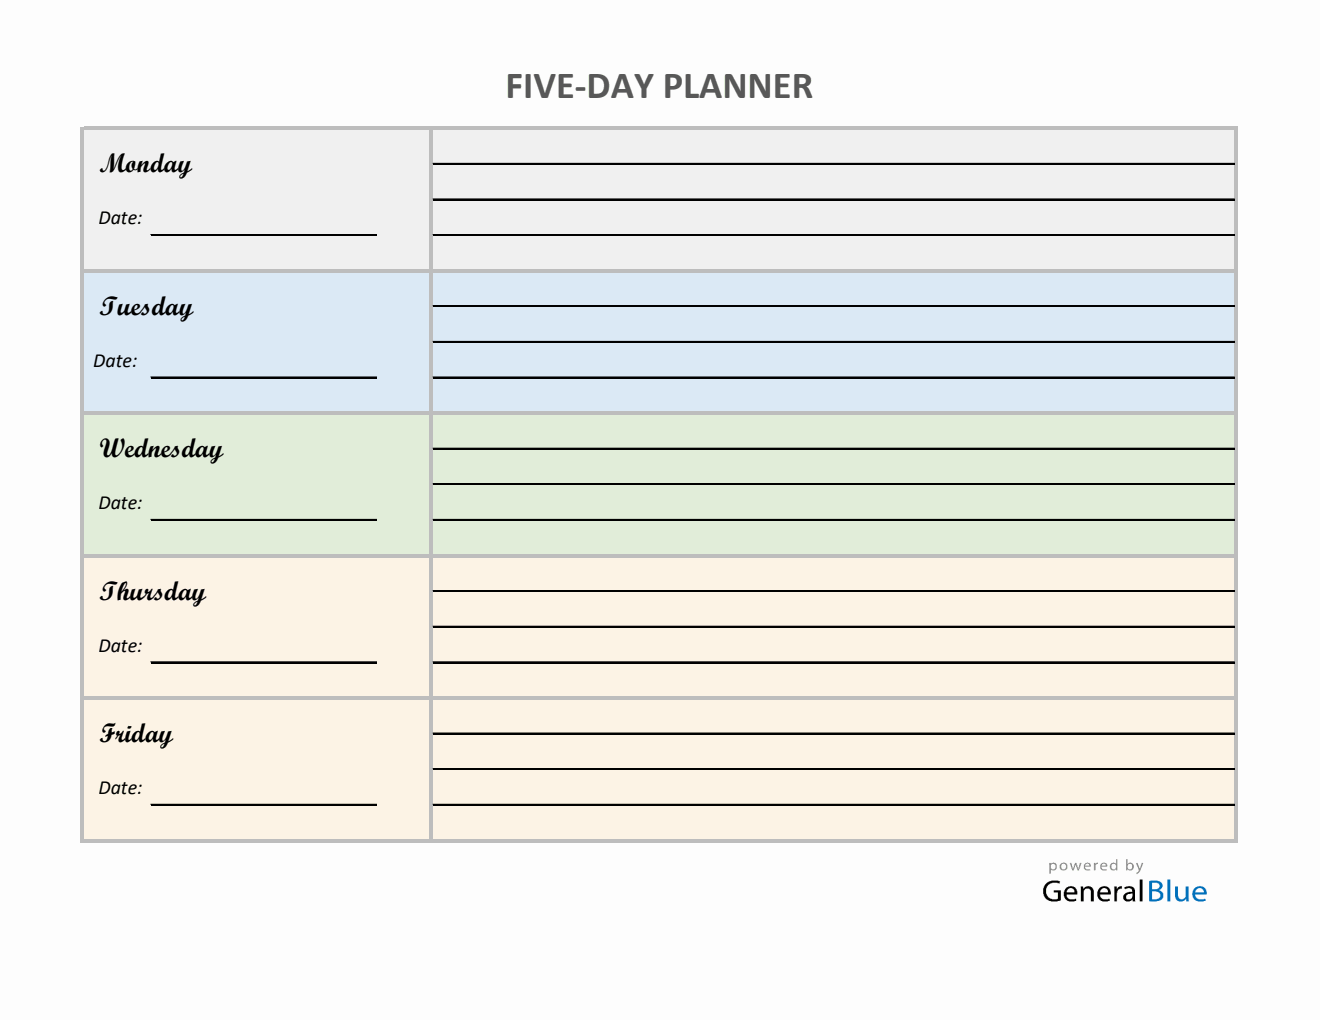 Five-Day Appointment Sheet Template in Excel (Colorful)